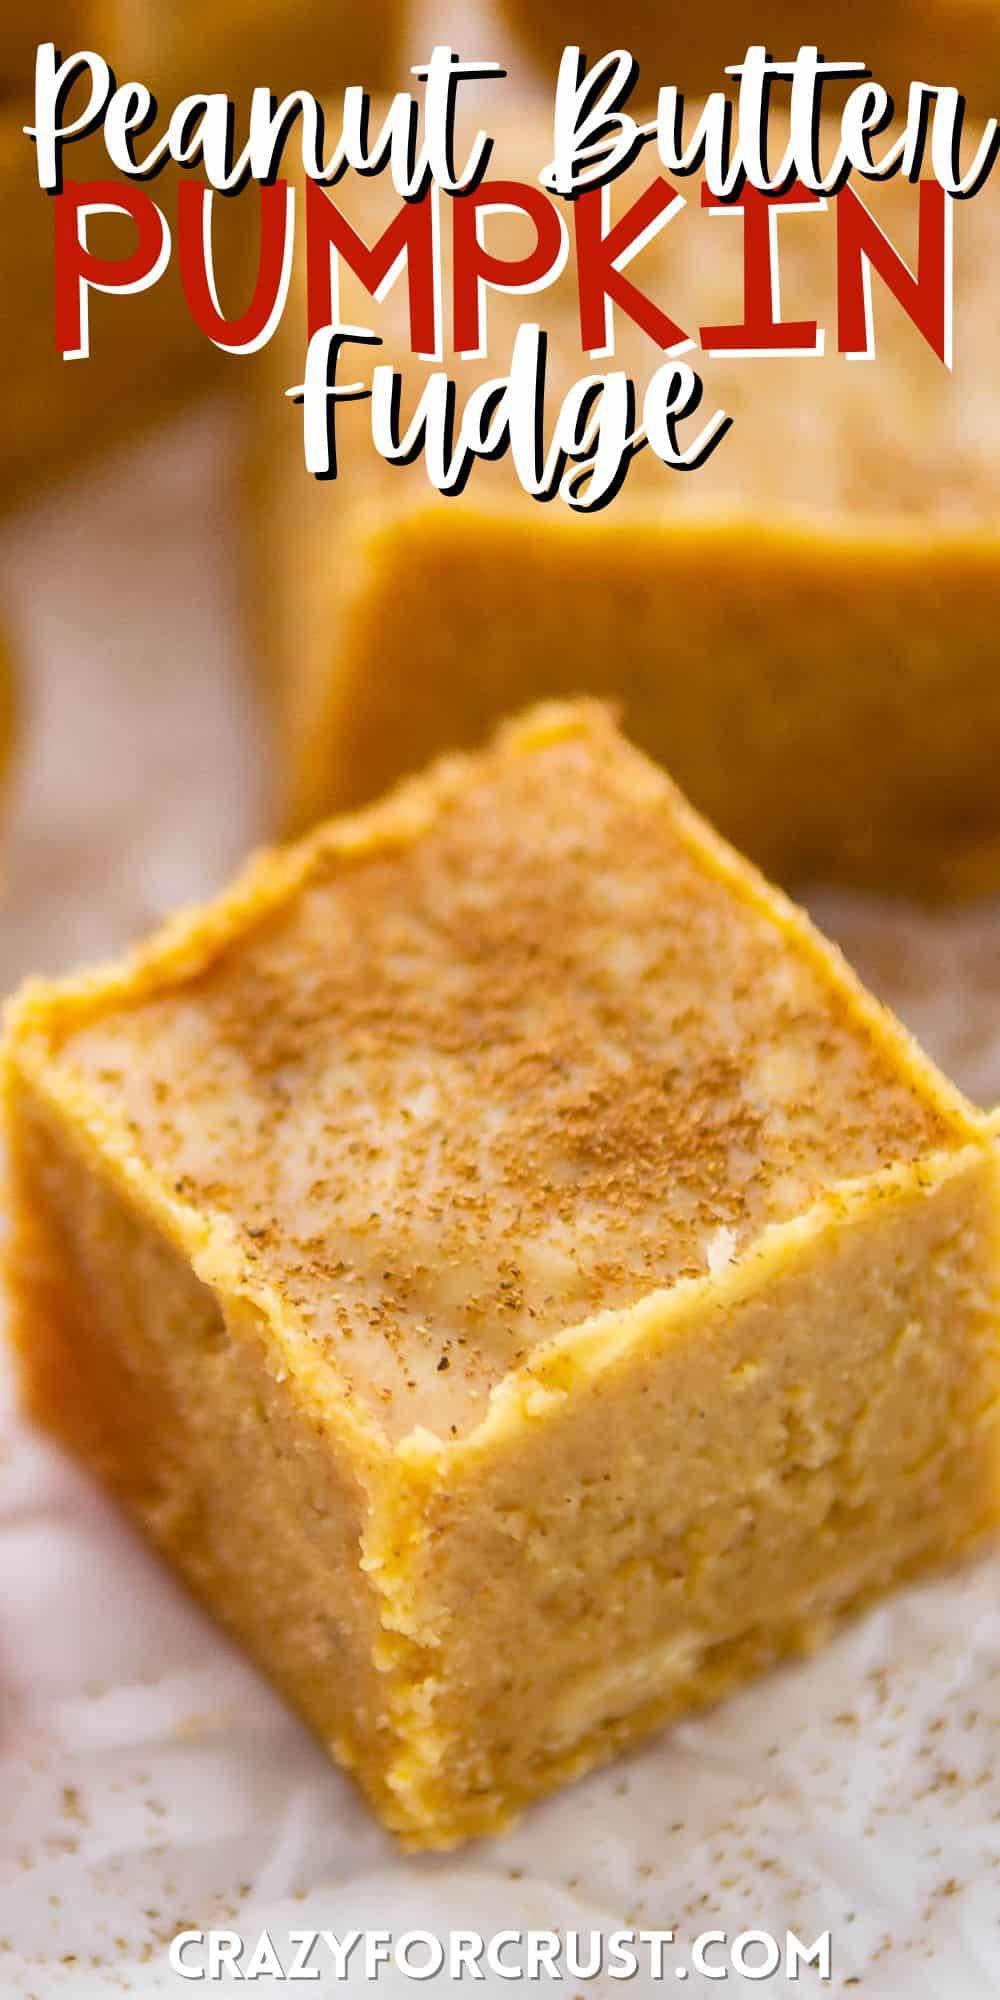 orange fudge with spices sprinkled on top with words on the image.